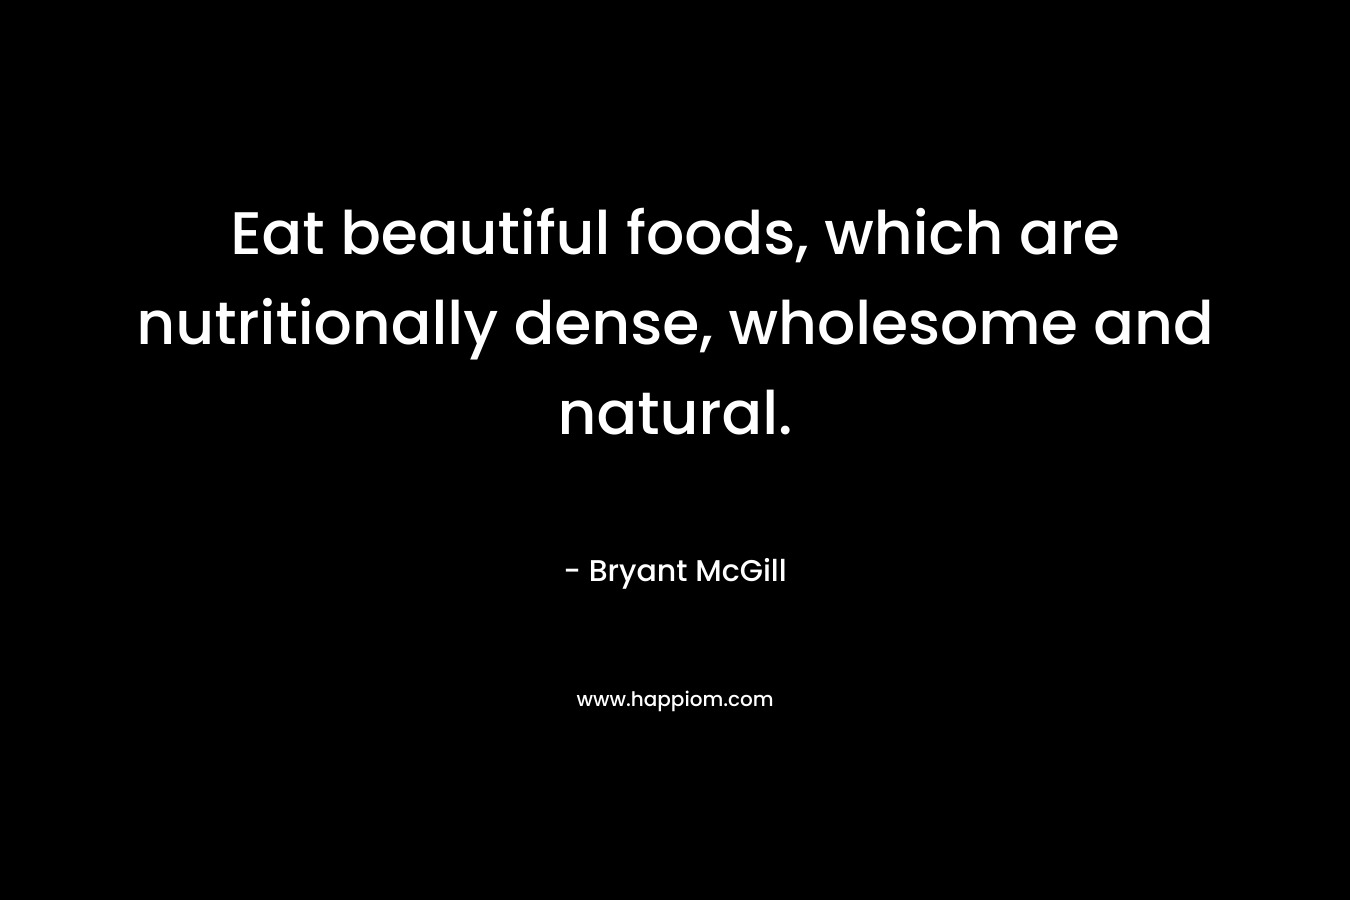 Eat beautiful foods, which are nutritionally dense, wholesome and natural. – Bryant McGill